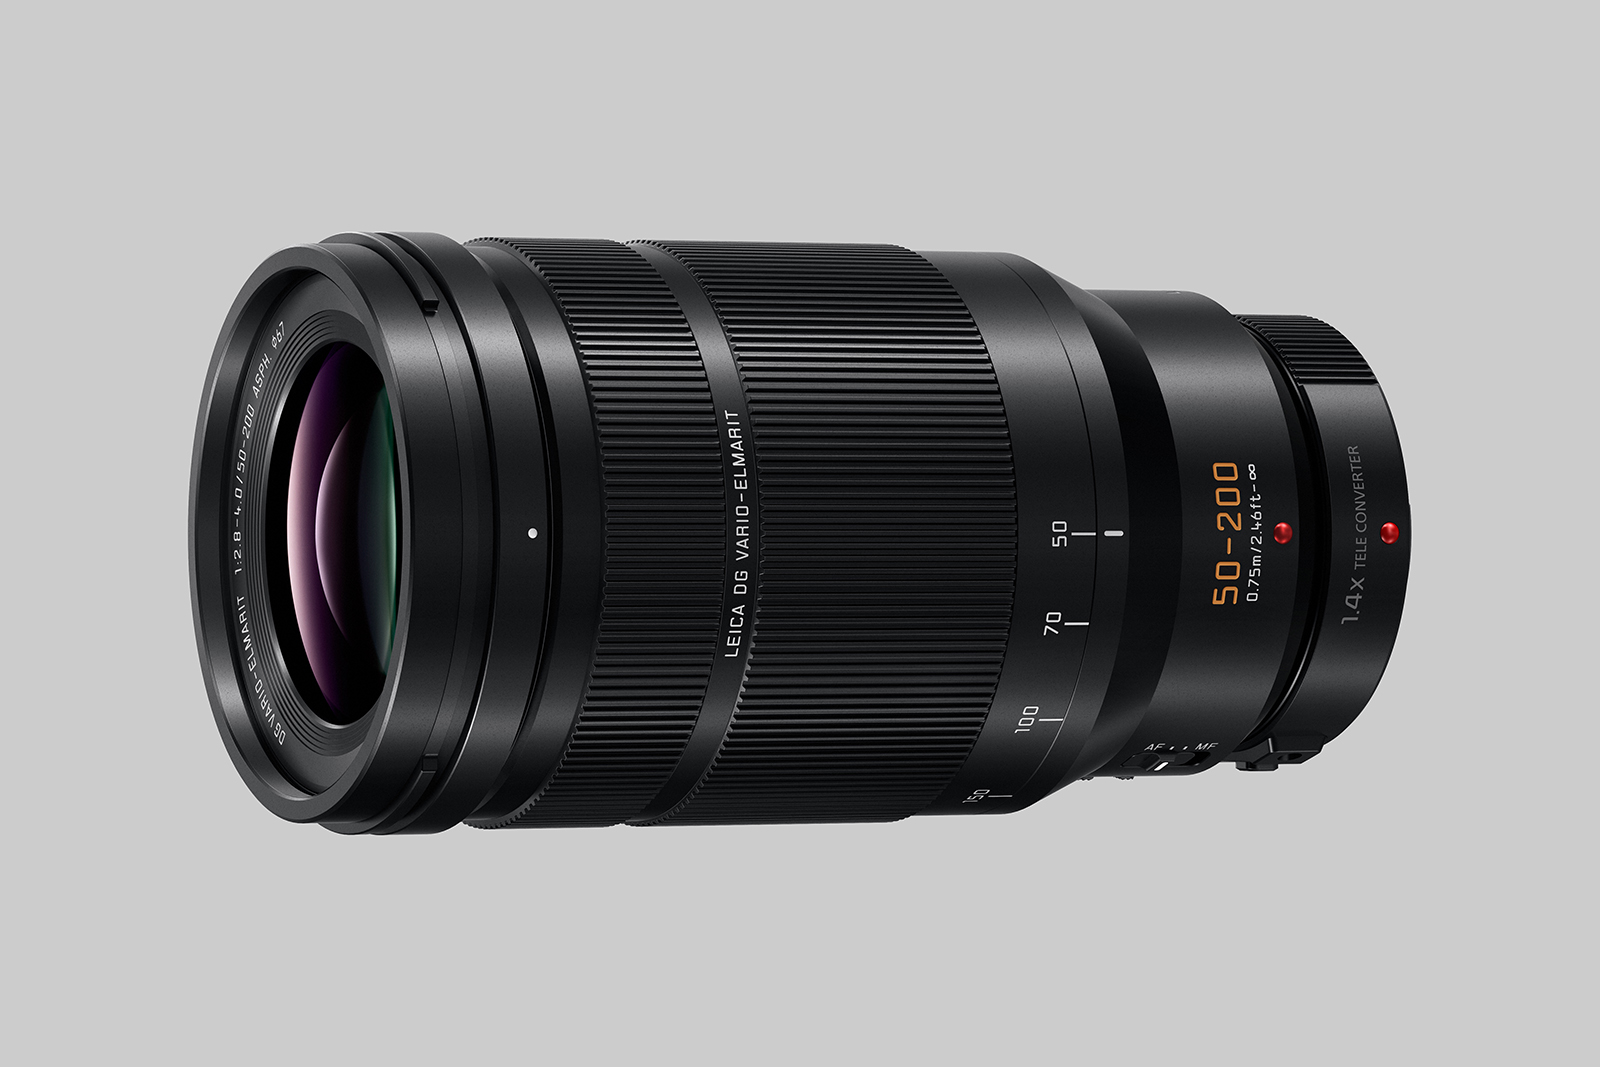 Panasonic's Latest Lens Delivers 200mm of Bright, Stabilized Zoom